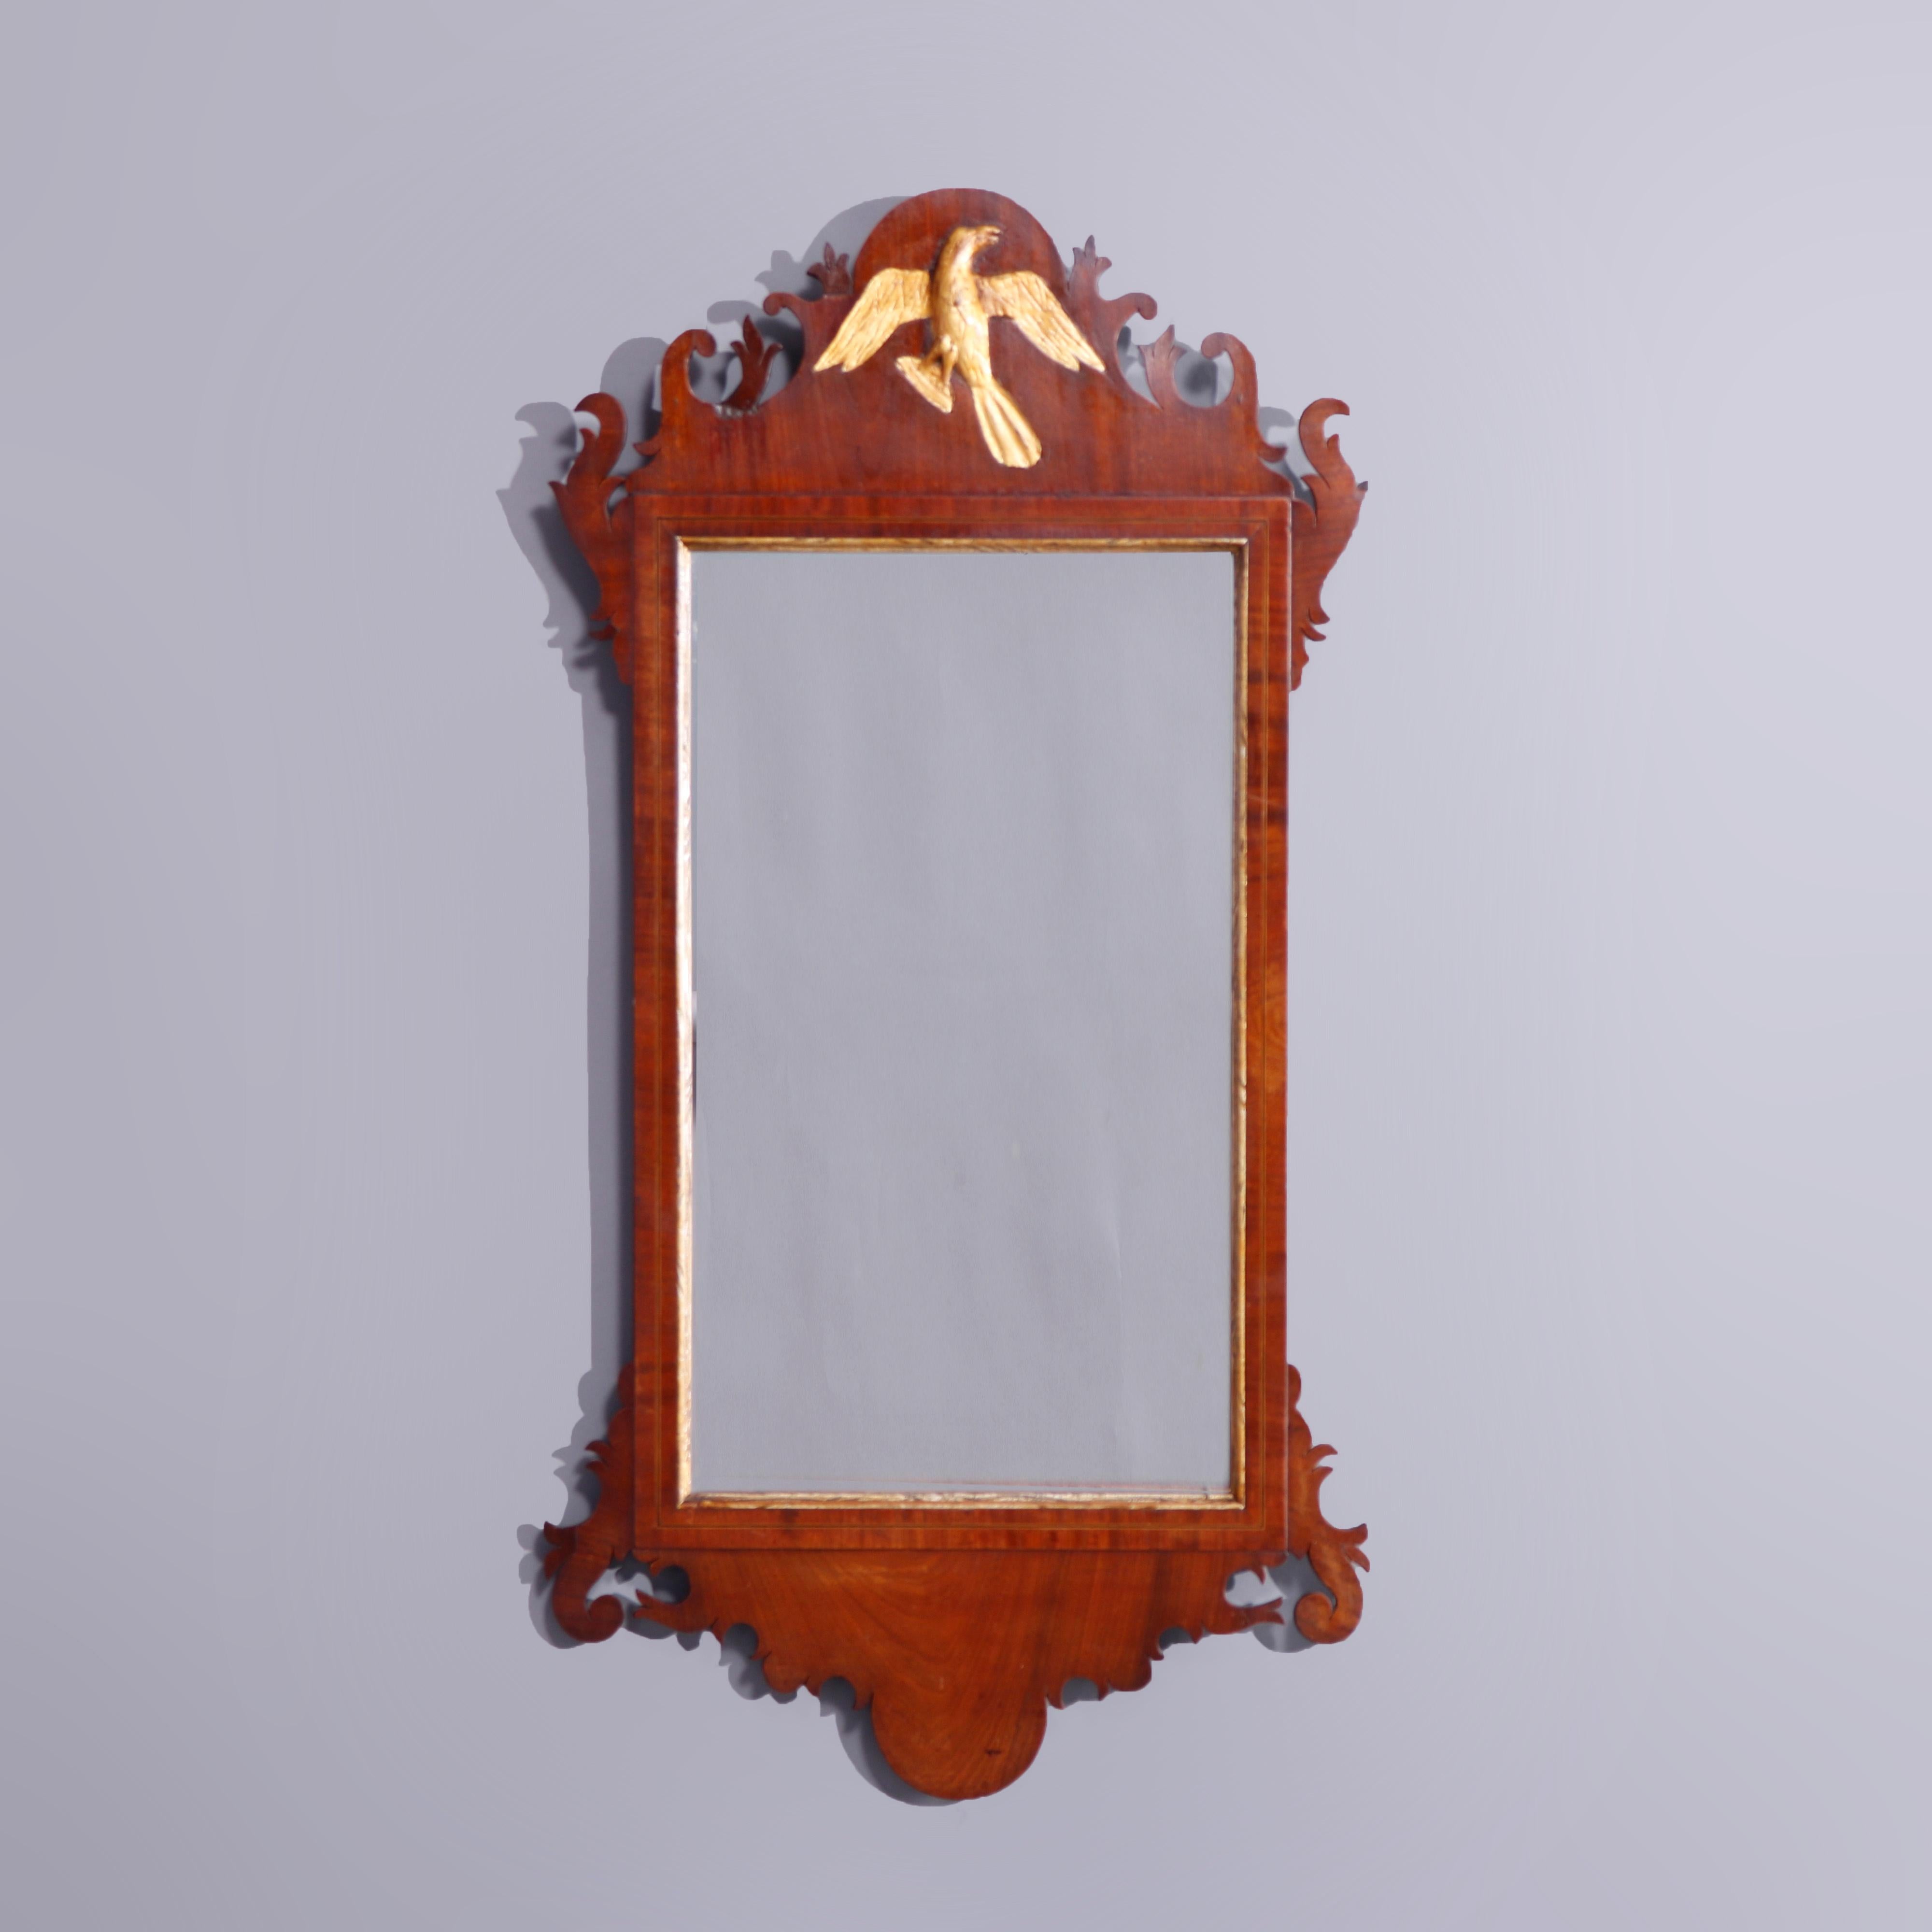 An antique and large Chippendale style mirror offers shaped parcel gilt mahogany frame with scroll and foliate border with gilt phoenix at crest, c1810

Measures - 40.25'' H x 20.5'' W x 1.25'' D; sight 14.25'' x 28.5''.

Catalogue Note: Ask about